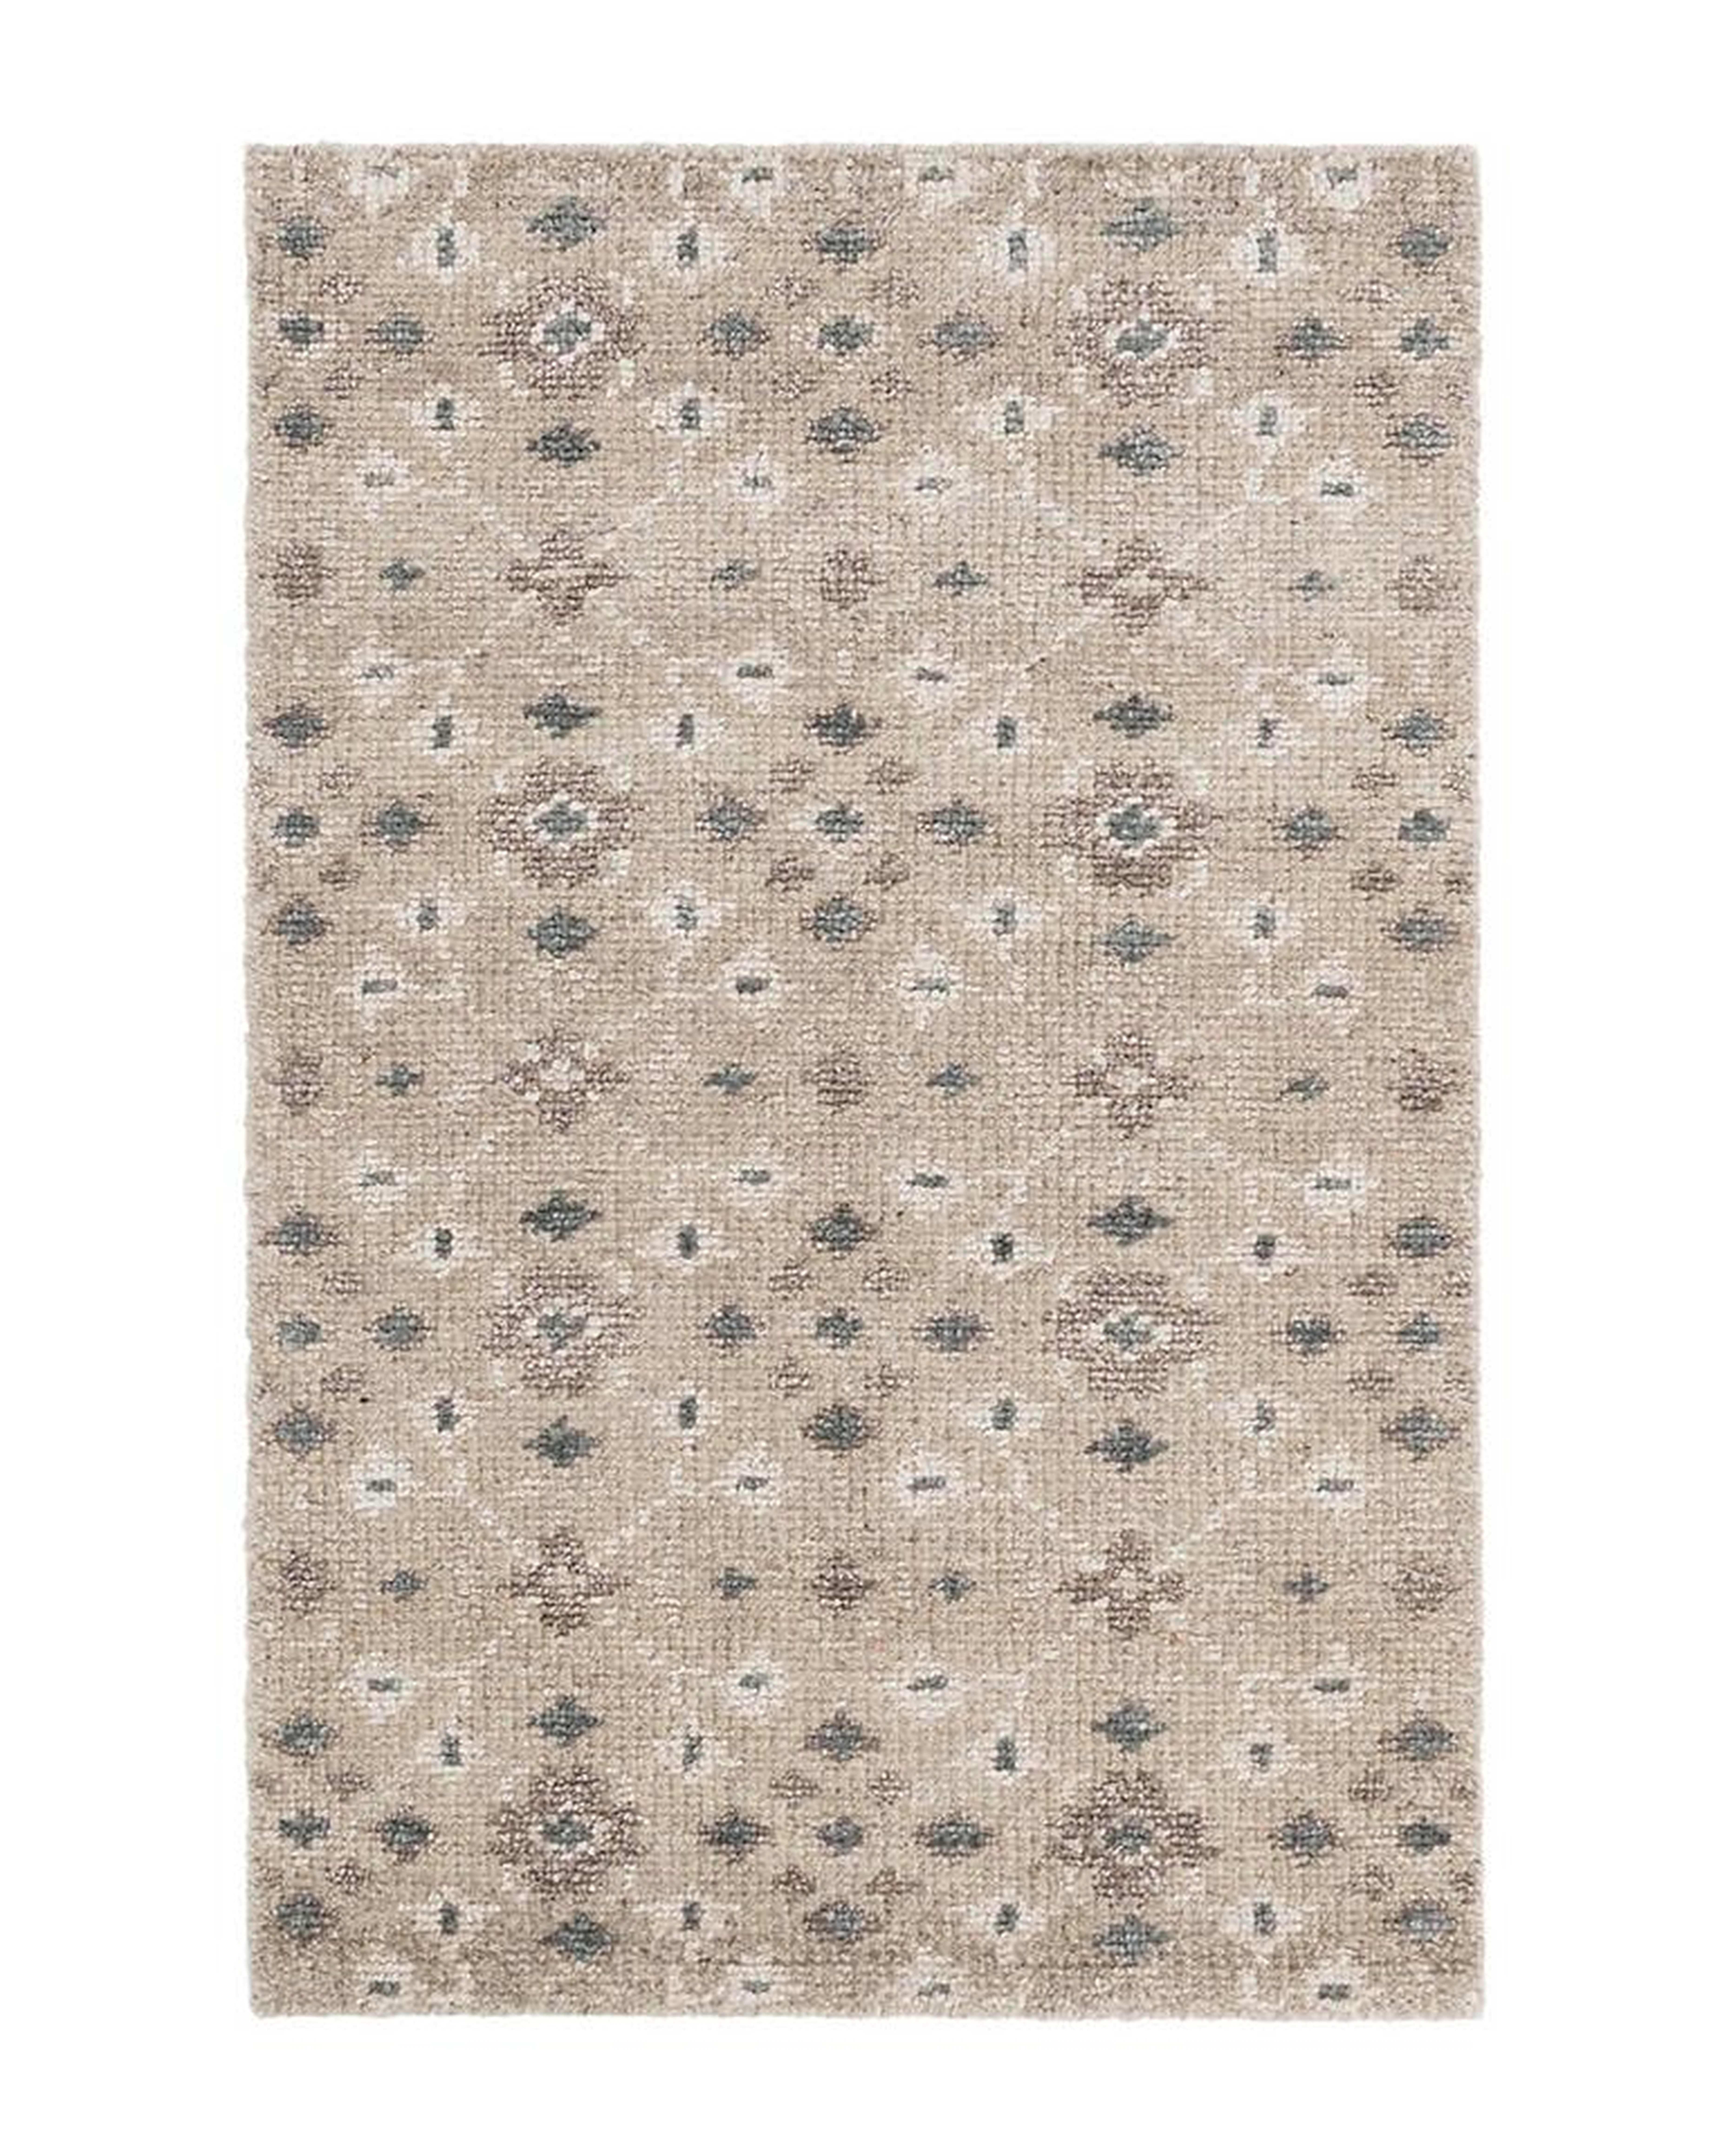 FLORENCE HAND-KNOTTED RUG, 8' x 10' - McGee & Co.